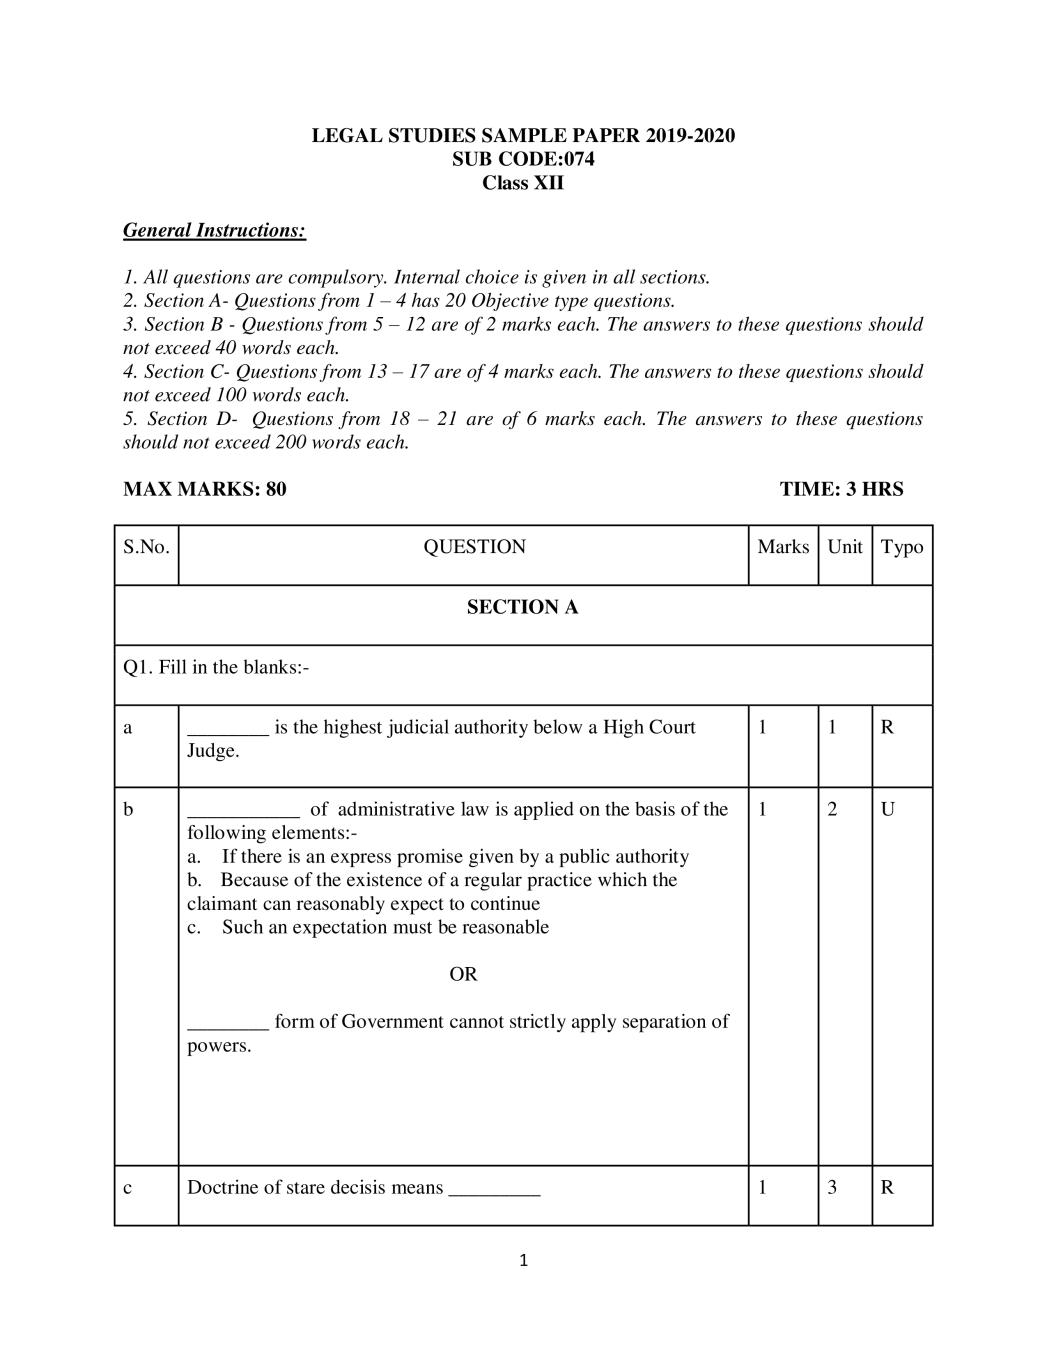 CBSE Class 12 Sample Paper 2020 for Legal Studies - Page 1